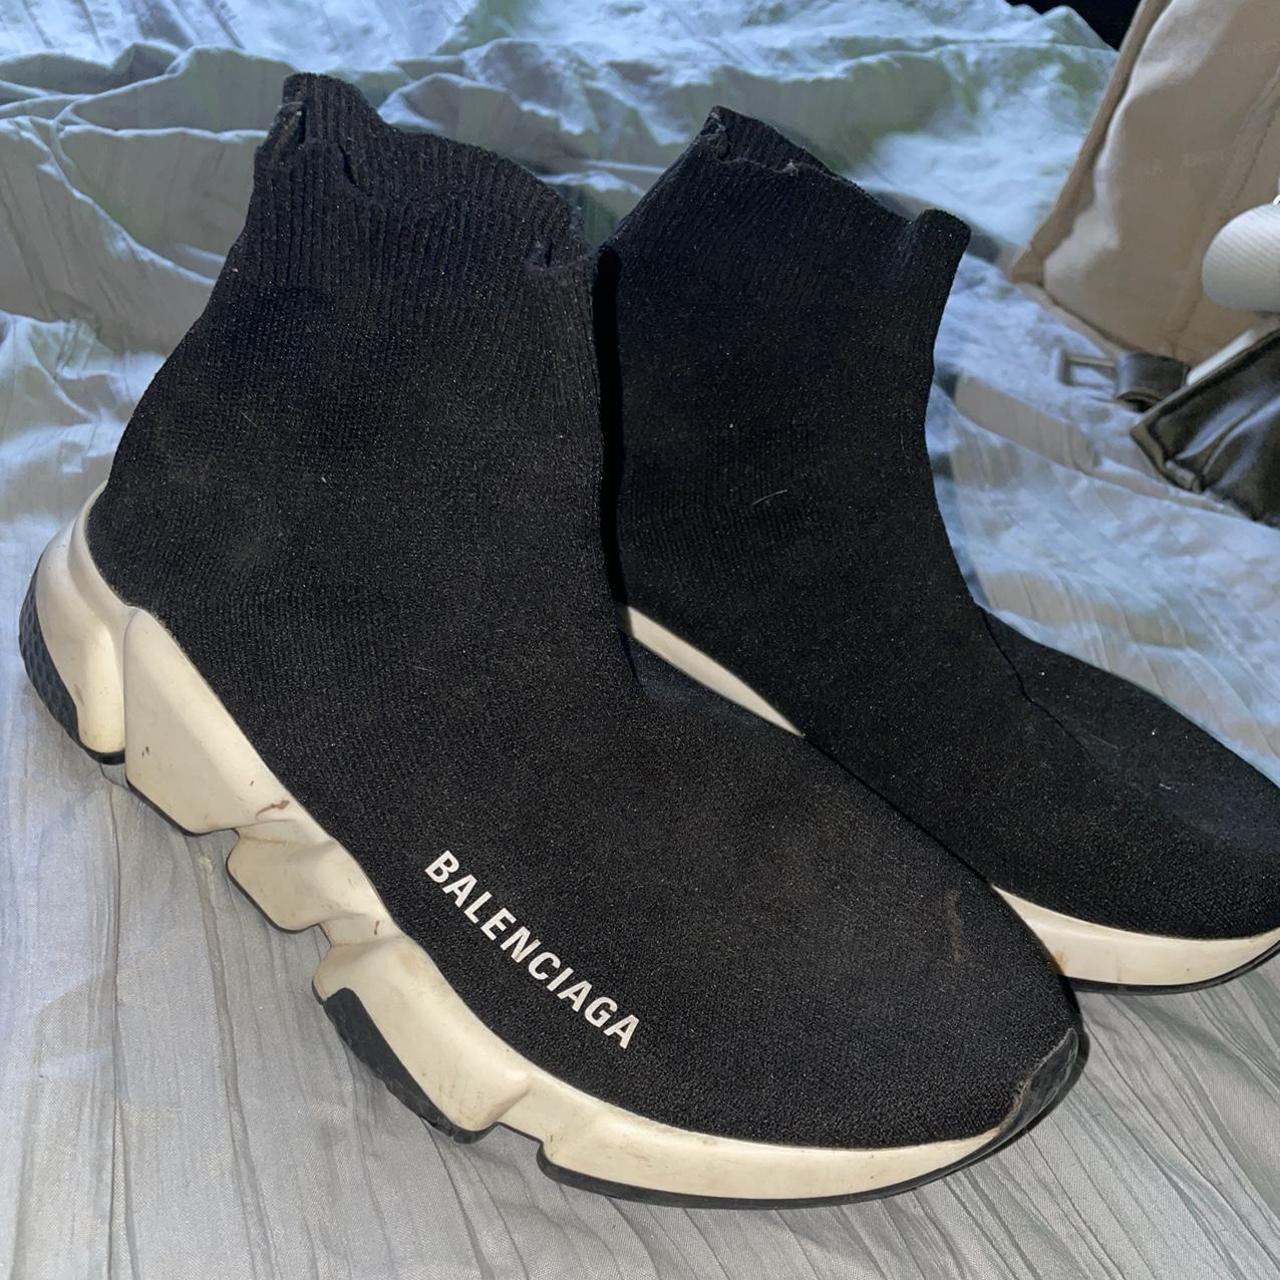 Authentic balenciaga sock trainers size 3 would fit... - Depop